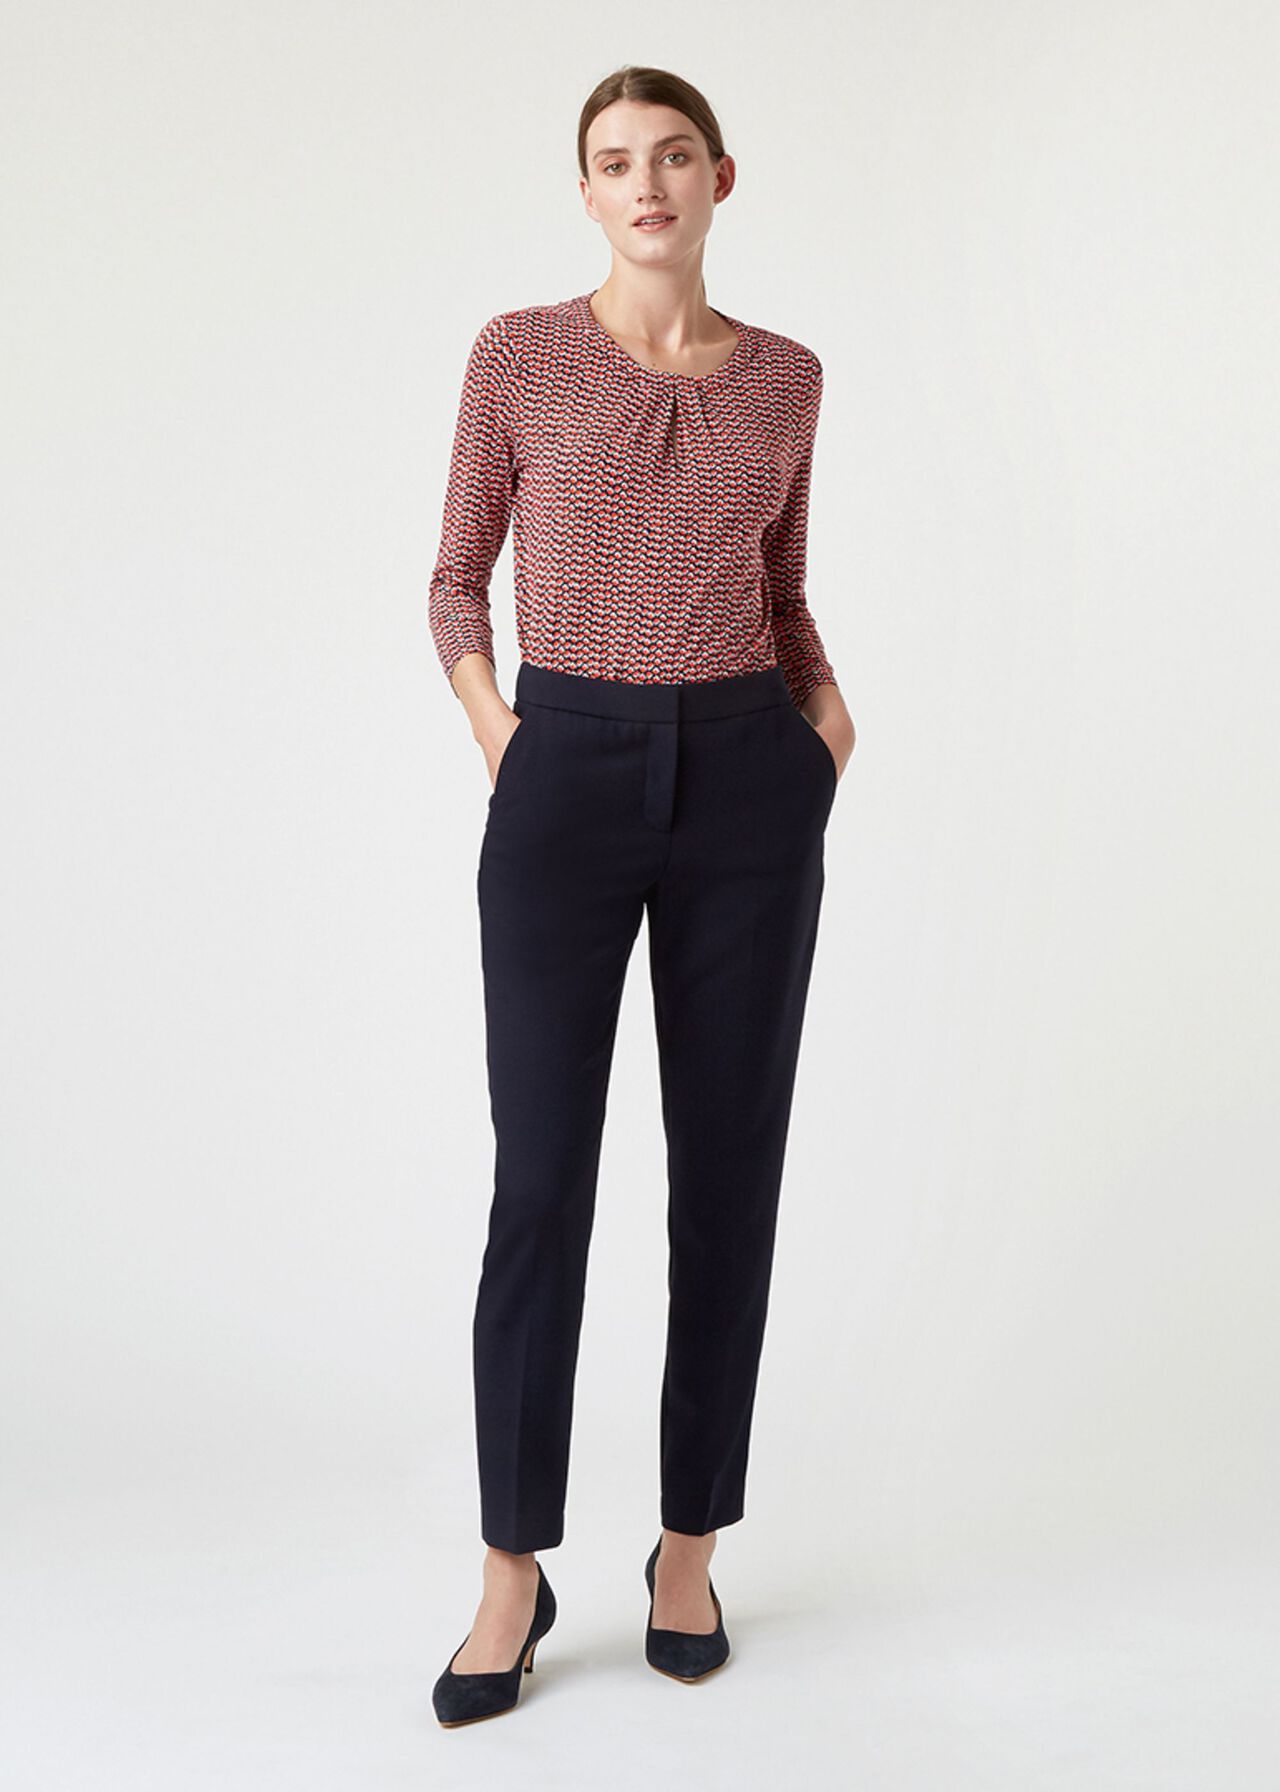 Petite Gael Wool Blend Trouser With Stretch, Navy, hi-res